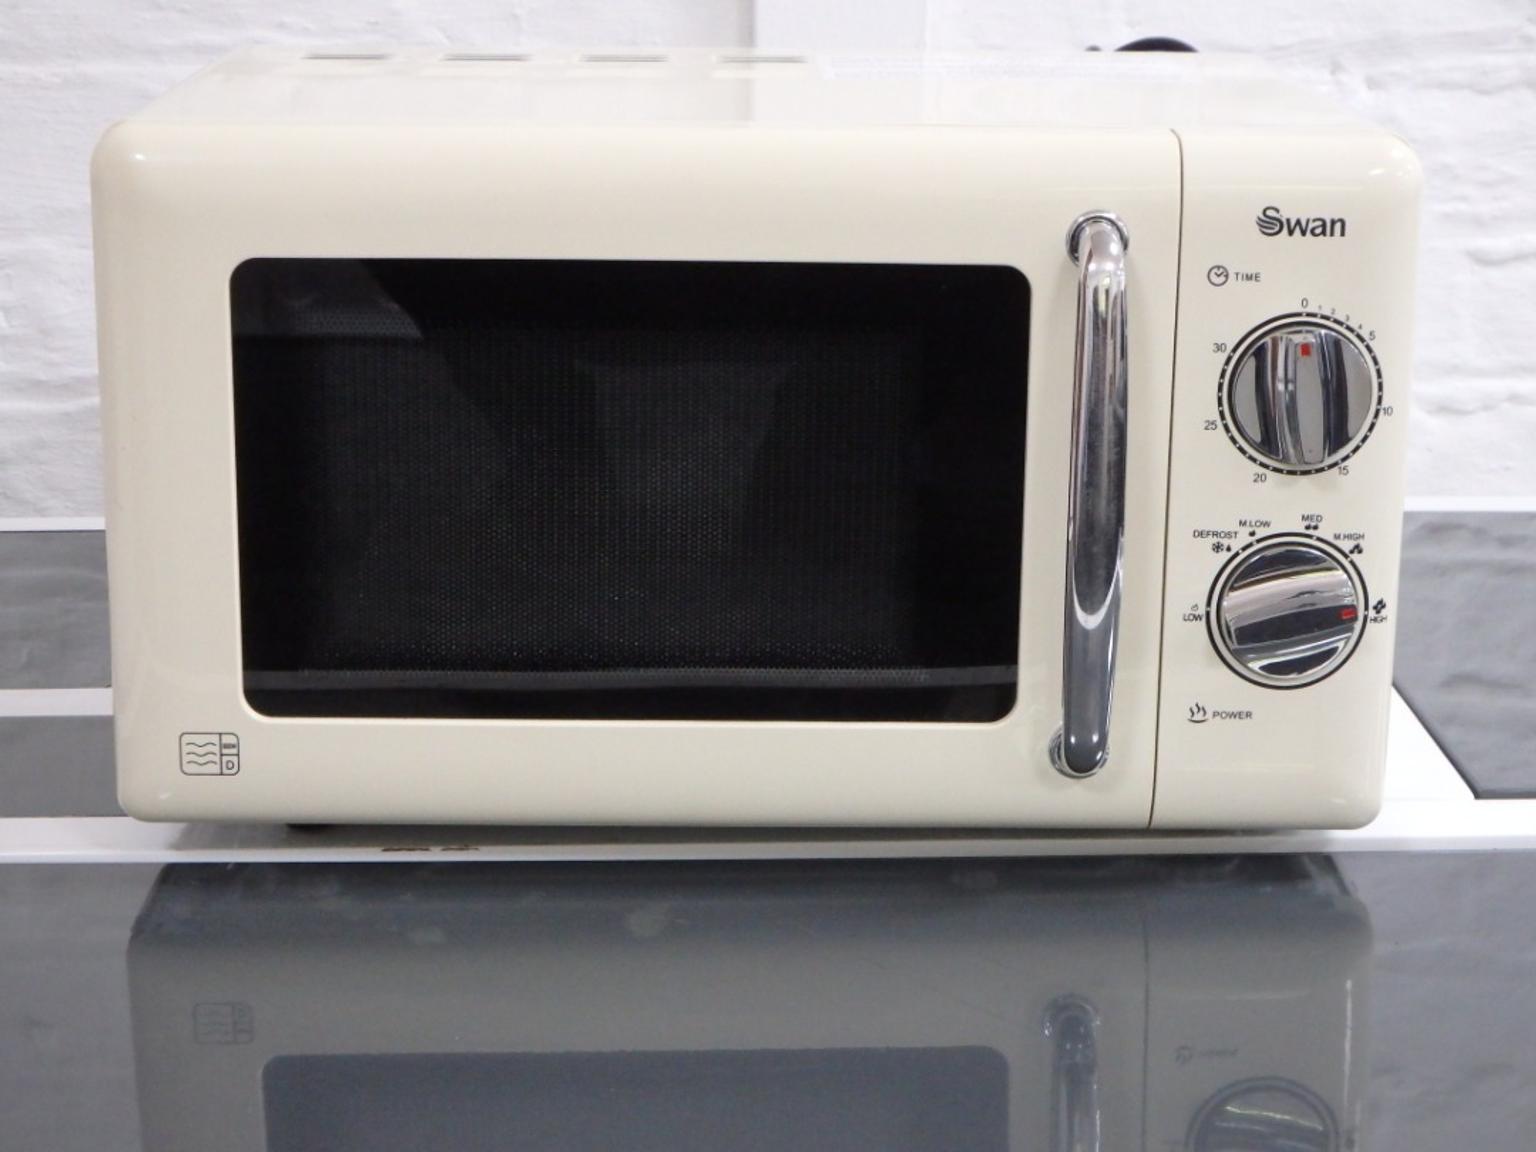 Swan SM22080C 20-Litre Manual Microwave in HD8 Scissett for £42.00 for